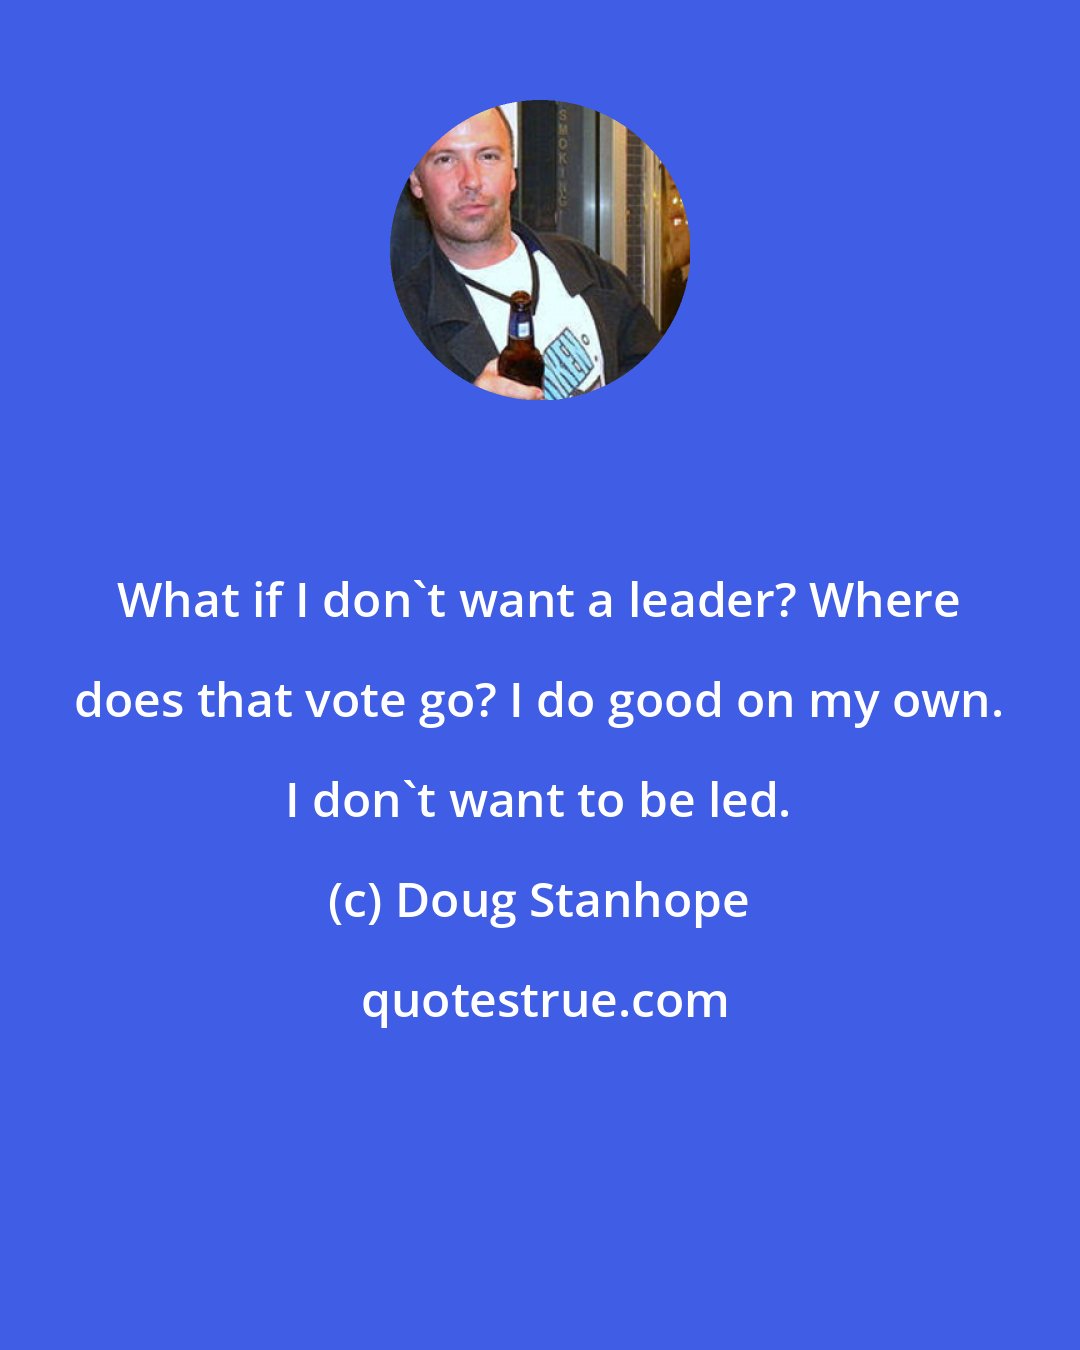 Doug Stanhope: What if I don't want a leader? Where does that vote go? I do good on my own. I don't want to be led.